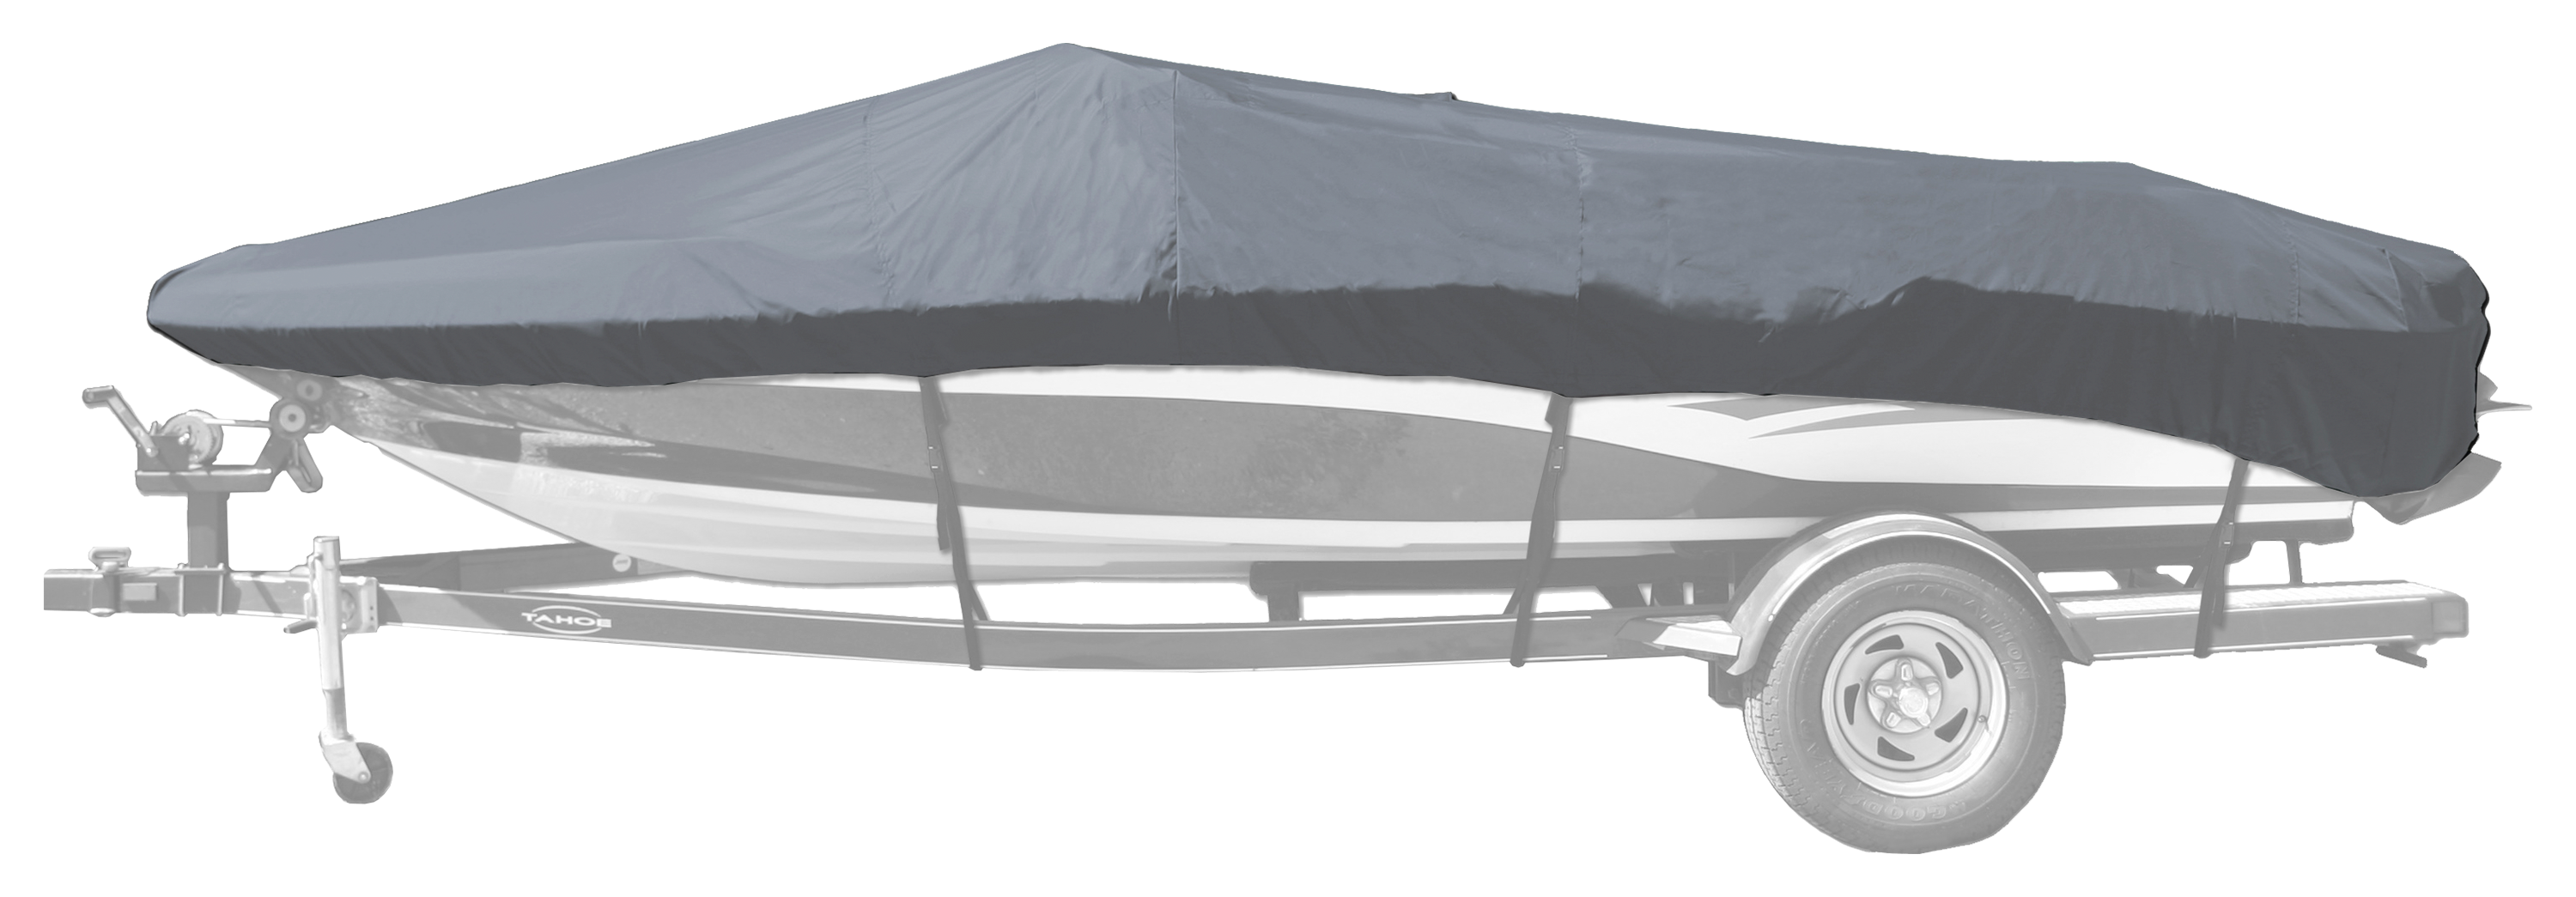 Bass Pro Shops Select Fit Hurricane Boat Cover by Westland for Euro V-Hull Runabout I/O Model - Gray - 22'6'' to 23'5